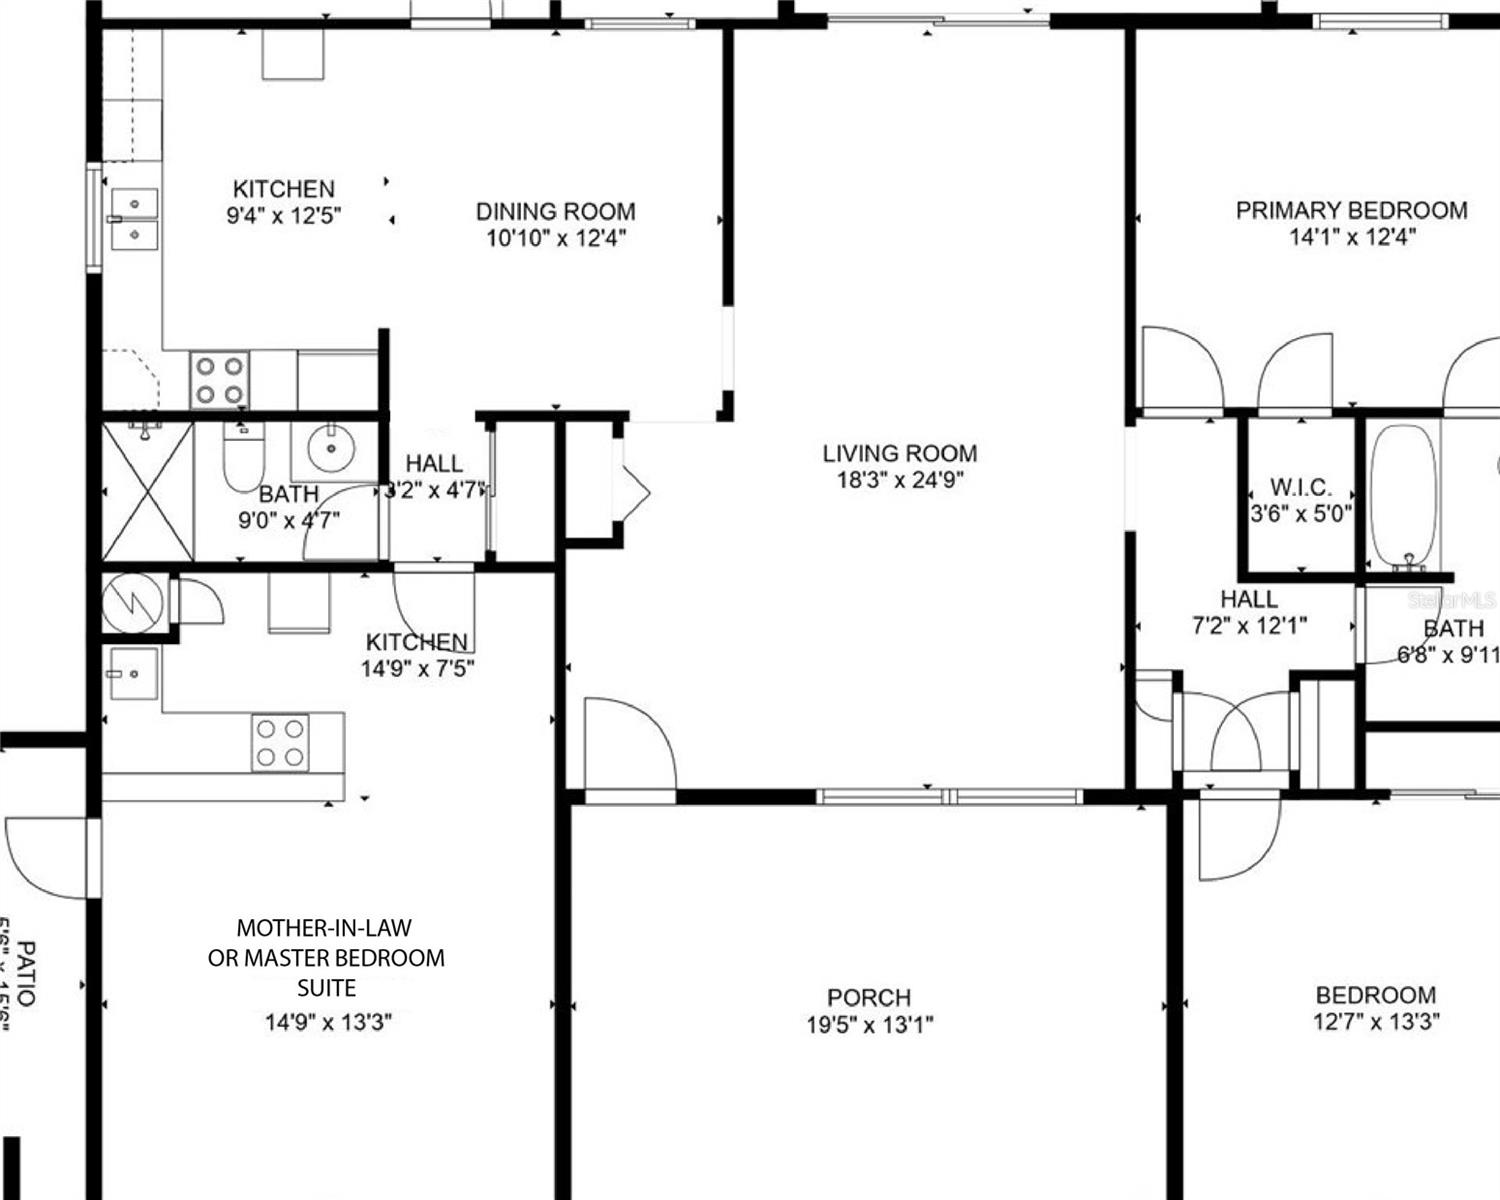 Updated Floor Plan with MIL Suite access to home